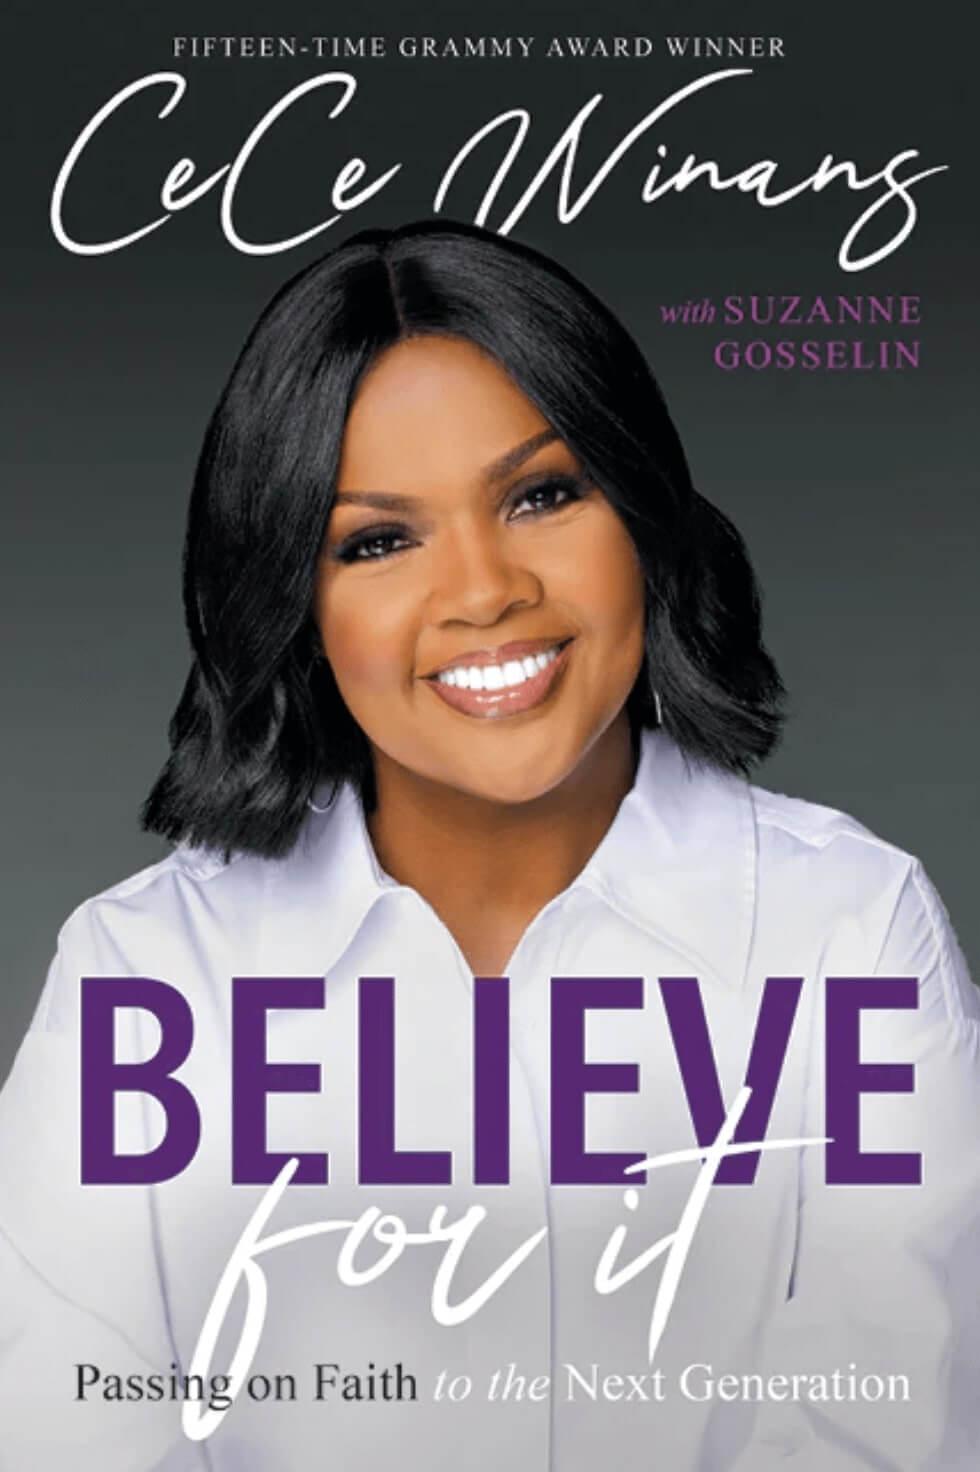 Cover of the book "Believe for It: Passing on Faith to the Next Generation"